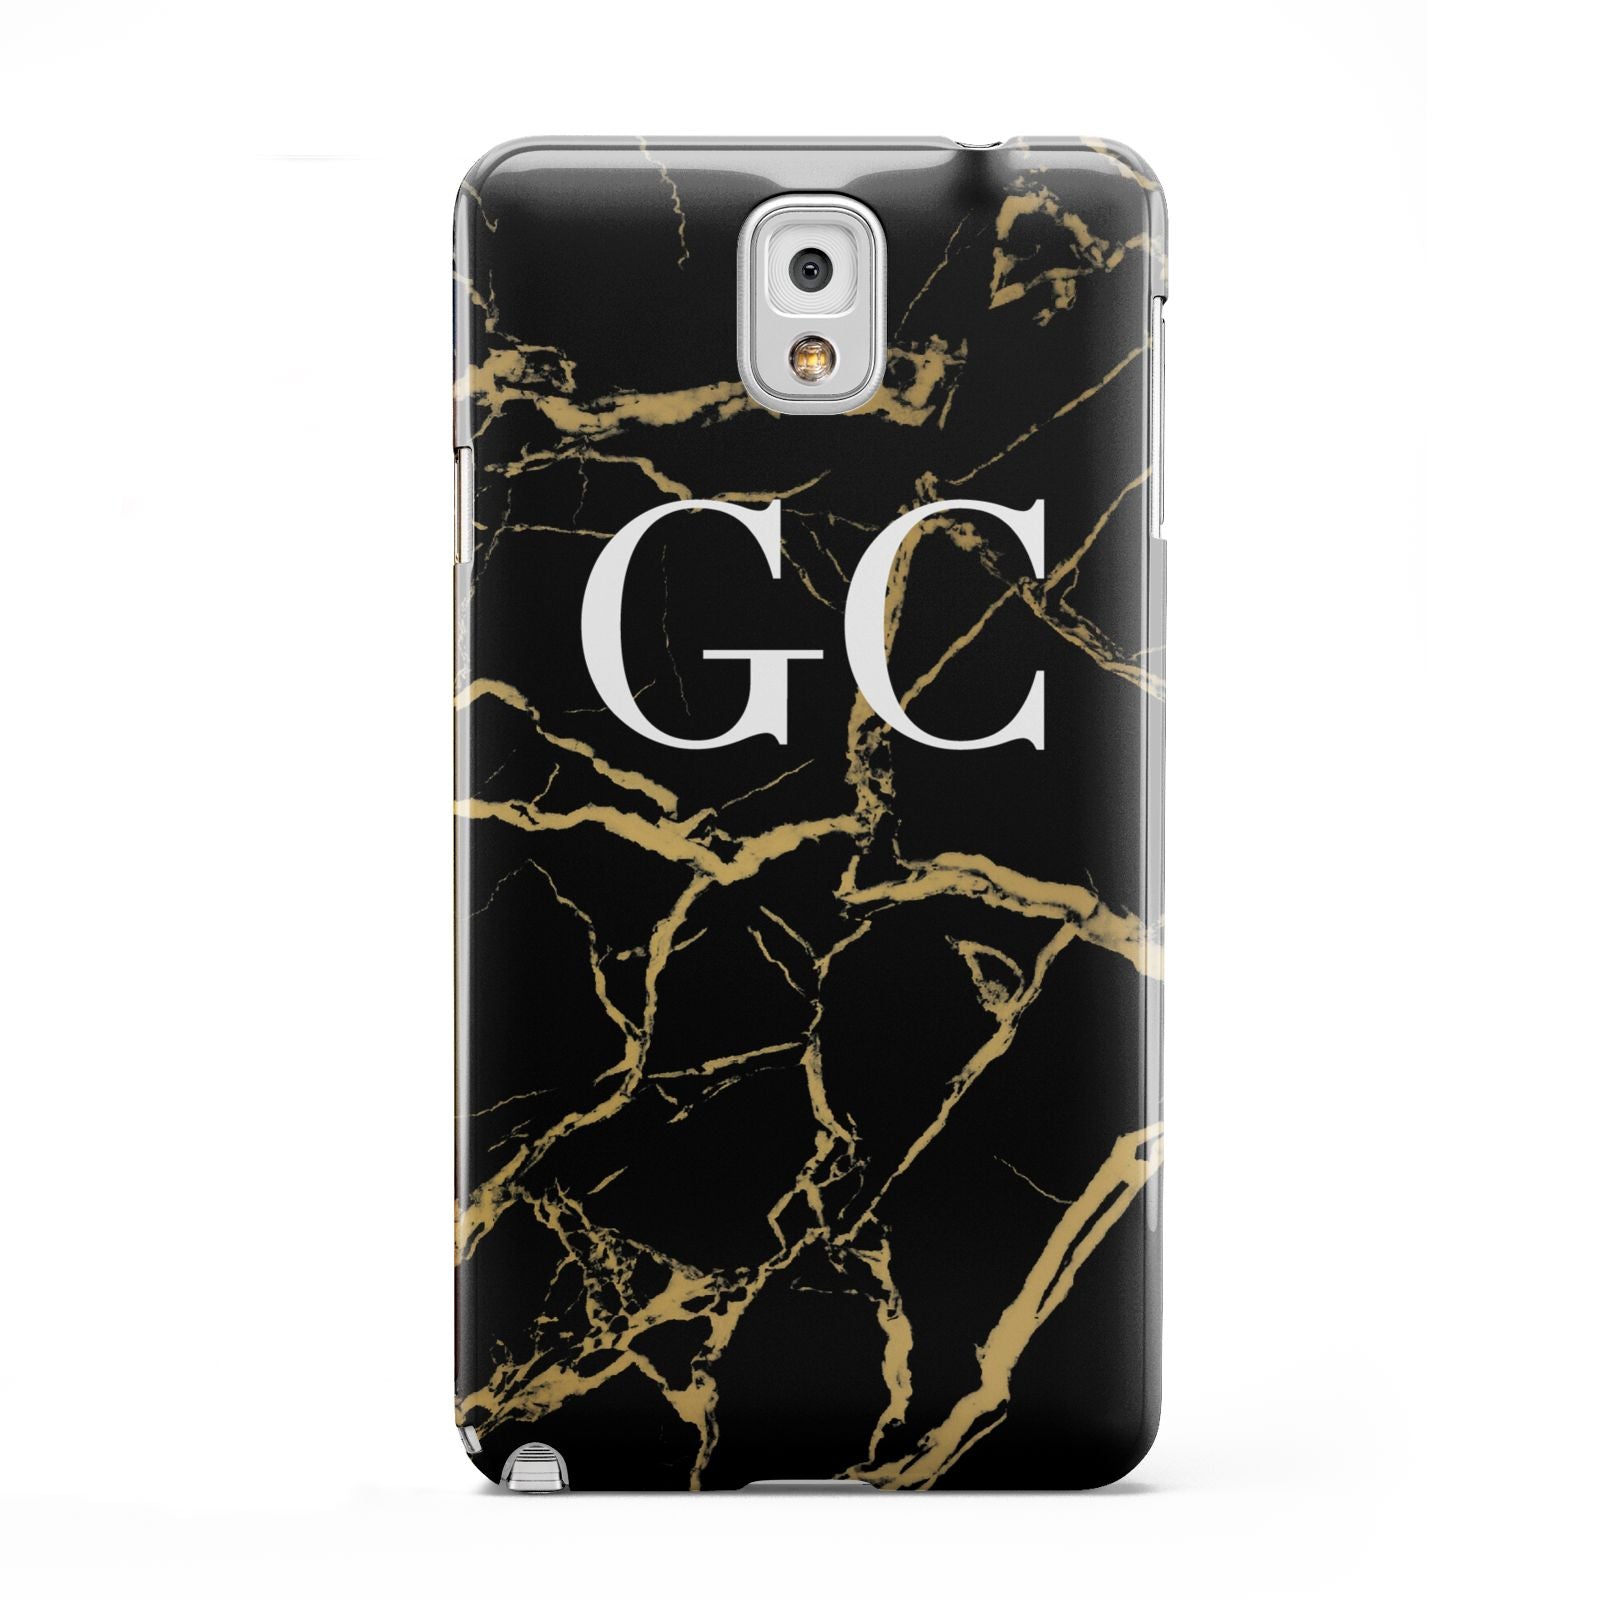 Personalised Gold Black Marble Monogram Samsung Galaxy Note 3 Case